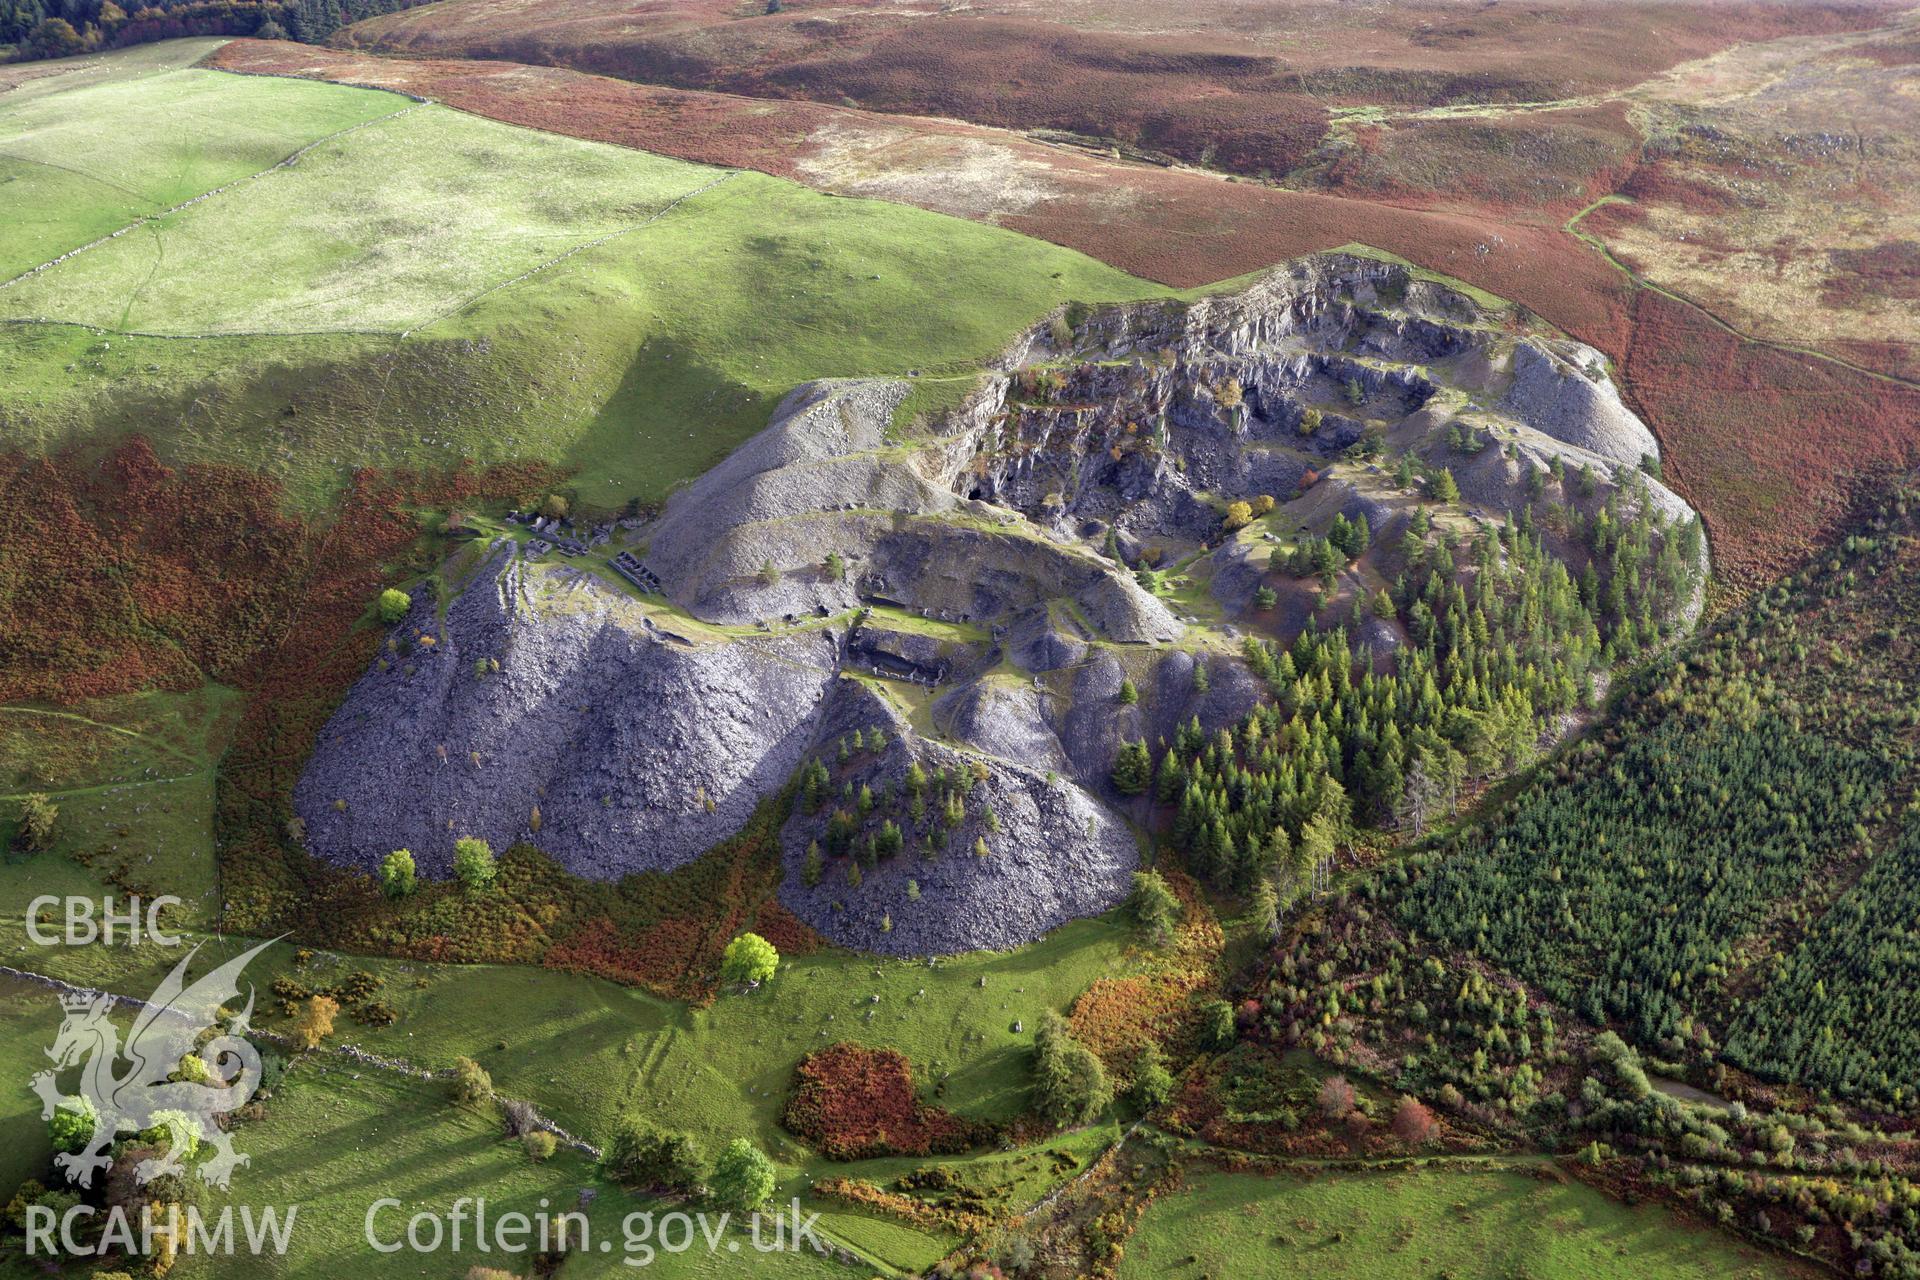 RCAHMW colour oblique aerial photograph of Penarth Slate Quarry, Corwen. Taken on 13 October 2009 by Toby Driver